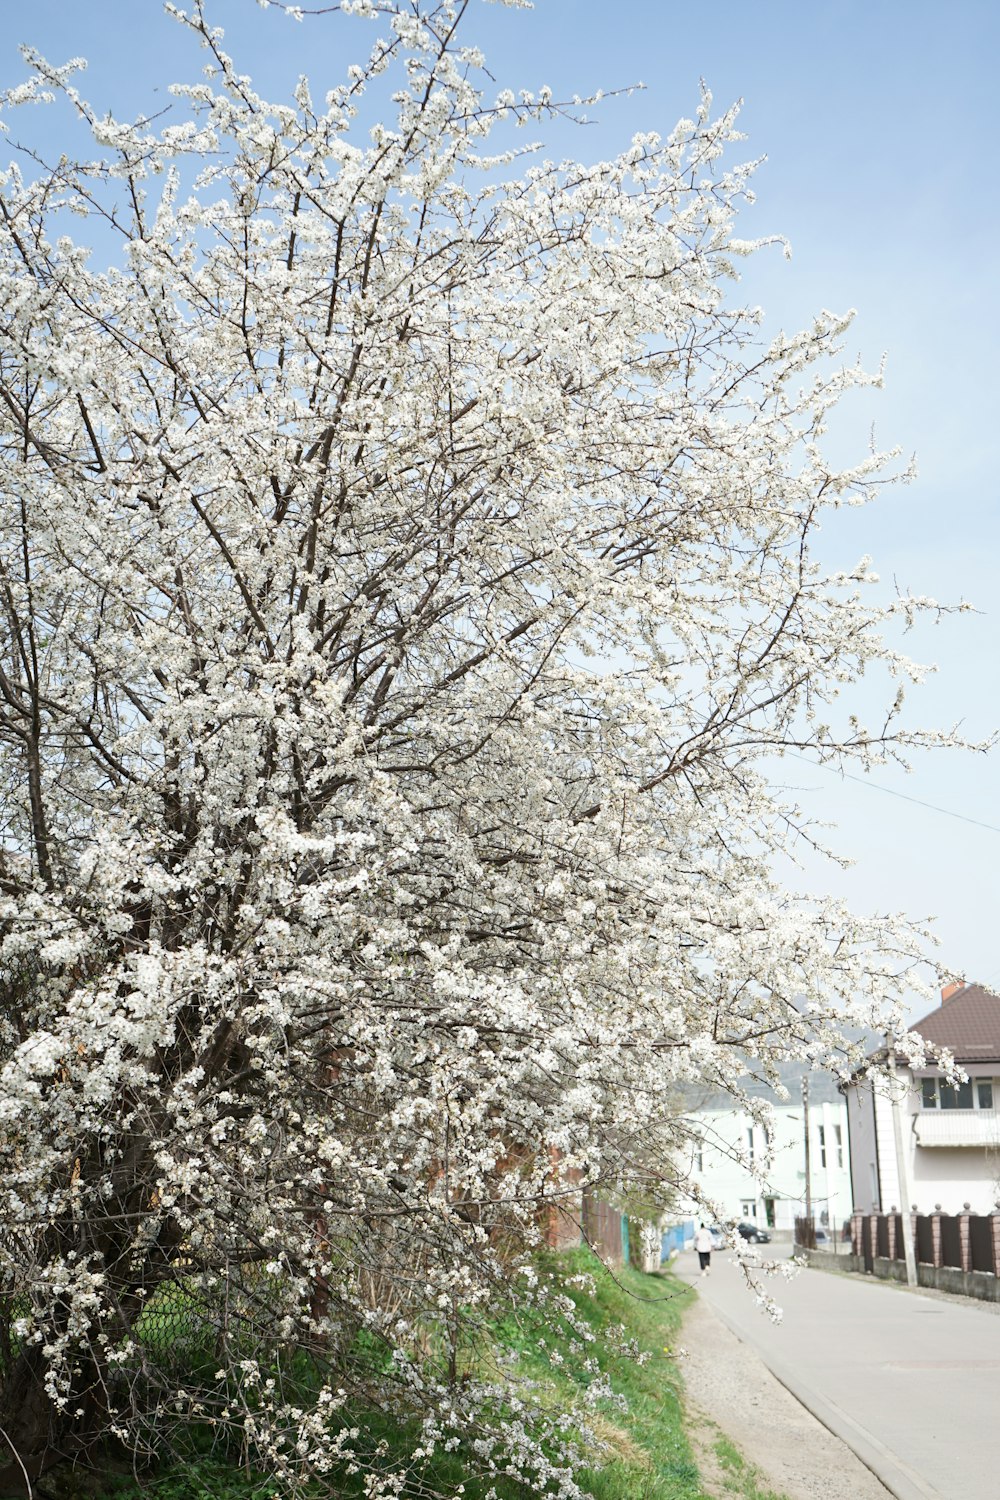 a tree with white flowers in the middle of a street